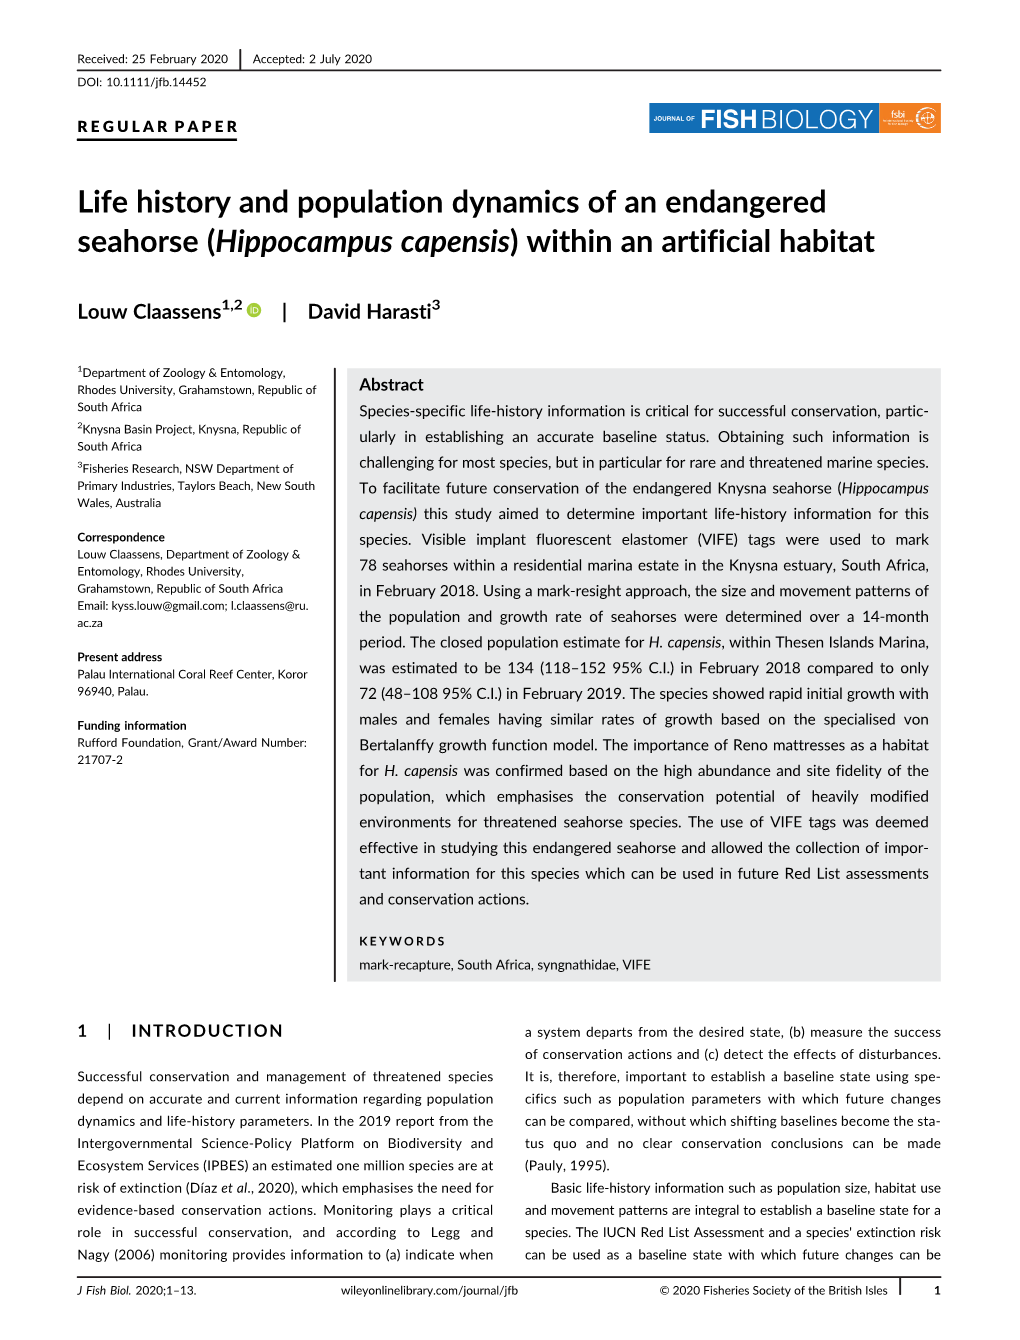 Life History and Population Dynamics of an Endangered Seahorse (Hippocampus Capensis) Within an Artificial Habitat